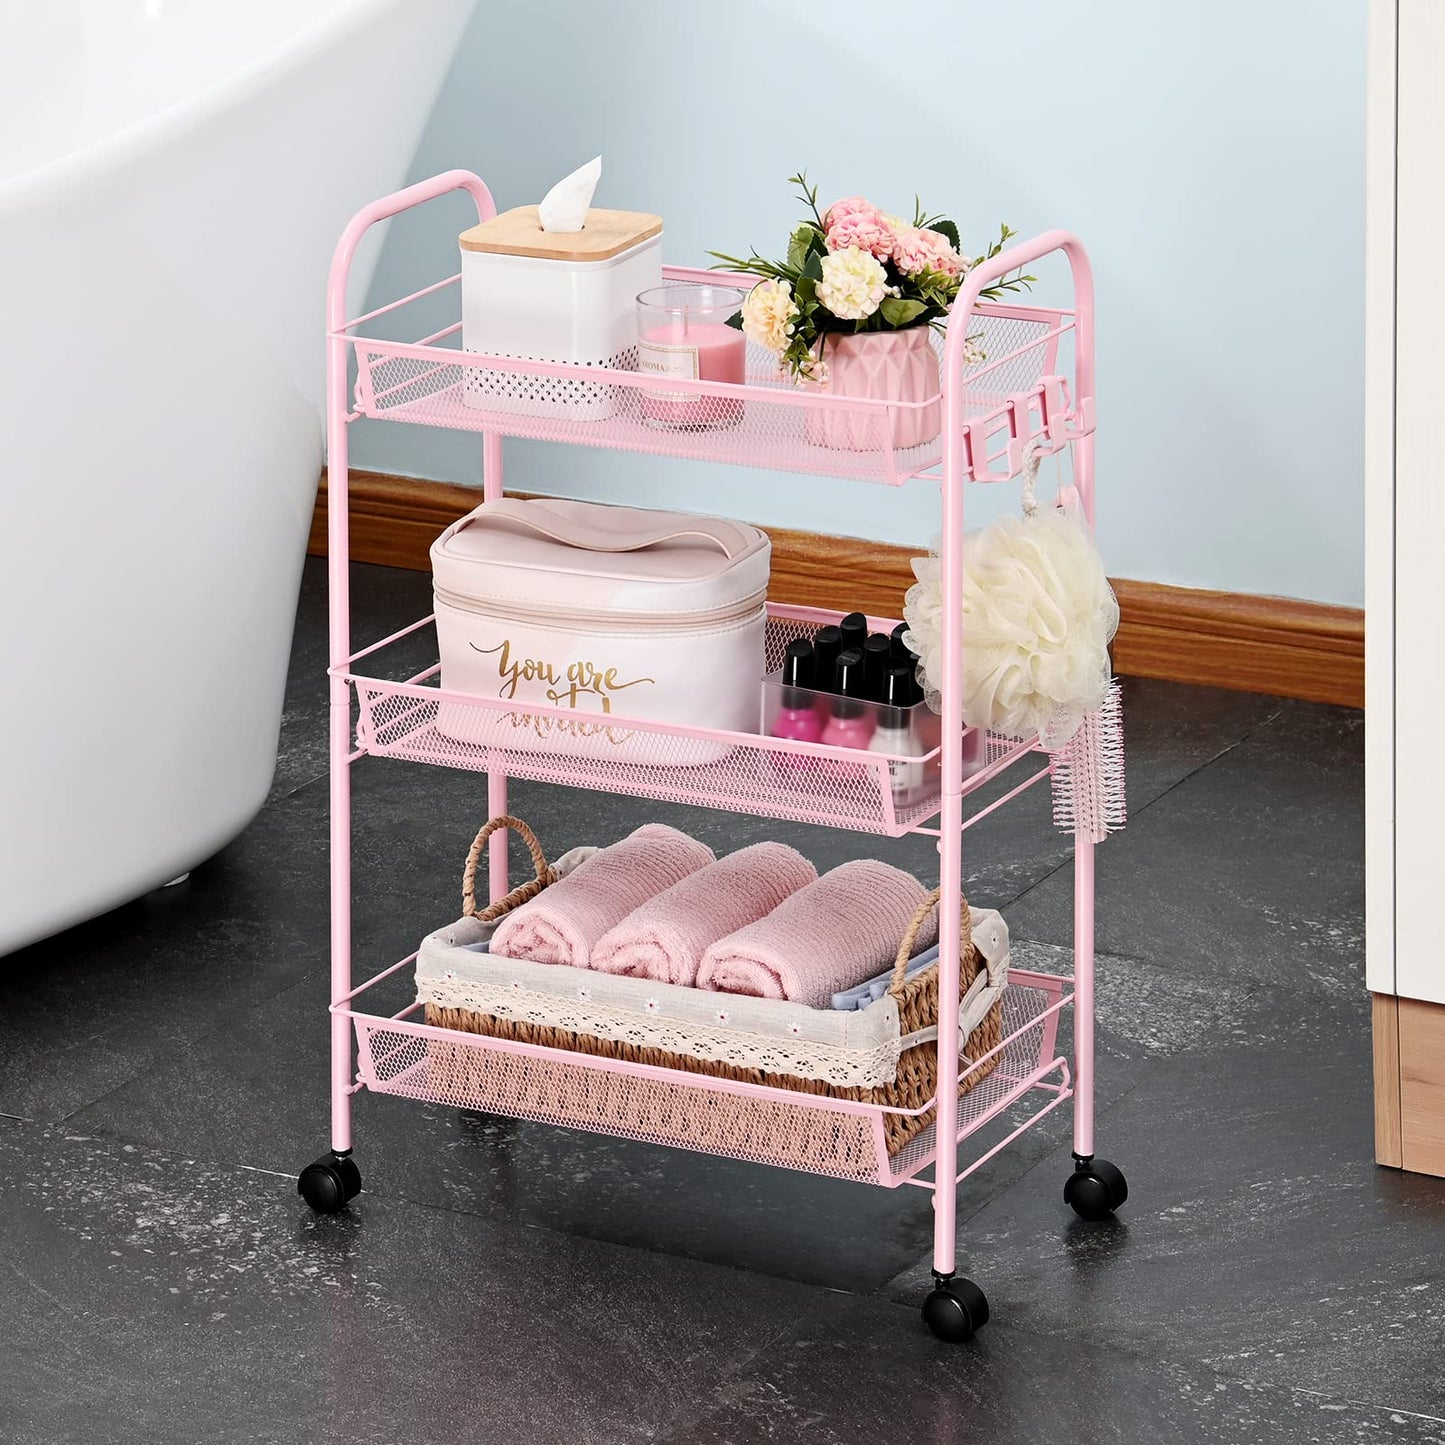 TOOLF 3-Tier Metal Rolling Cart, Mesh Wire Easy Assemble Utility Cart, Storage Trolley on Wheels with 3 Hooks, MetalStorage Shelving Units for Kitchen Bathroom Laundry Room